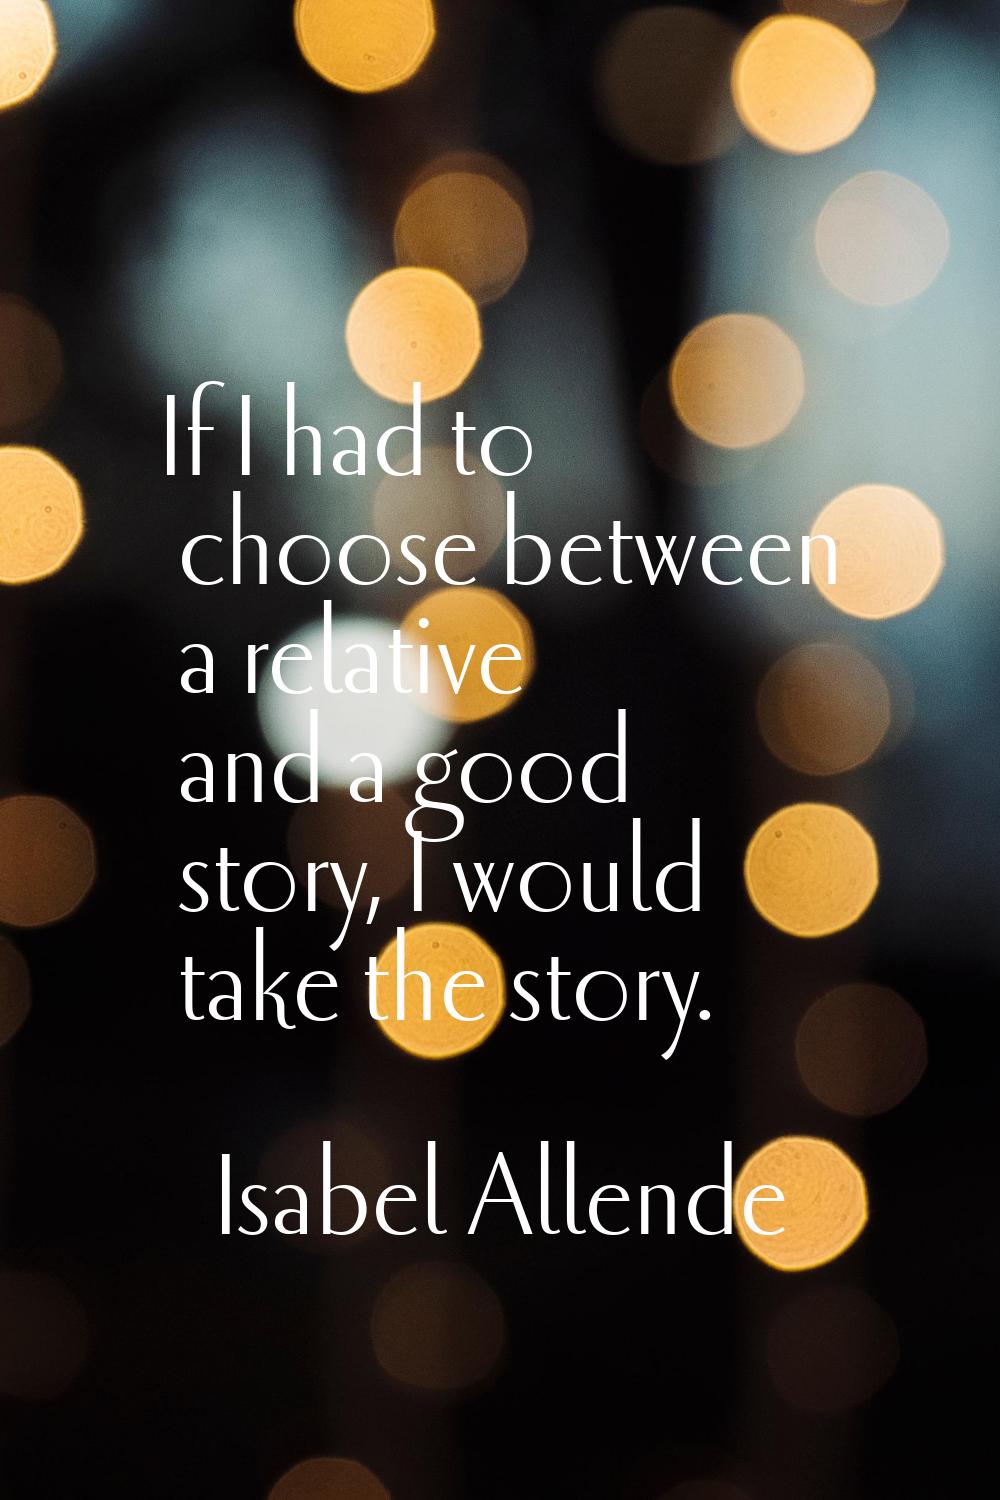 If I had to choose between a relative and a good story, I would take the story.